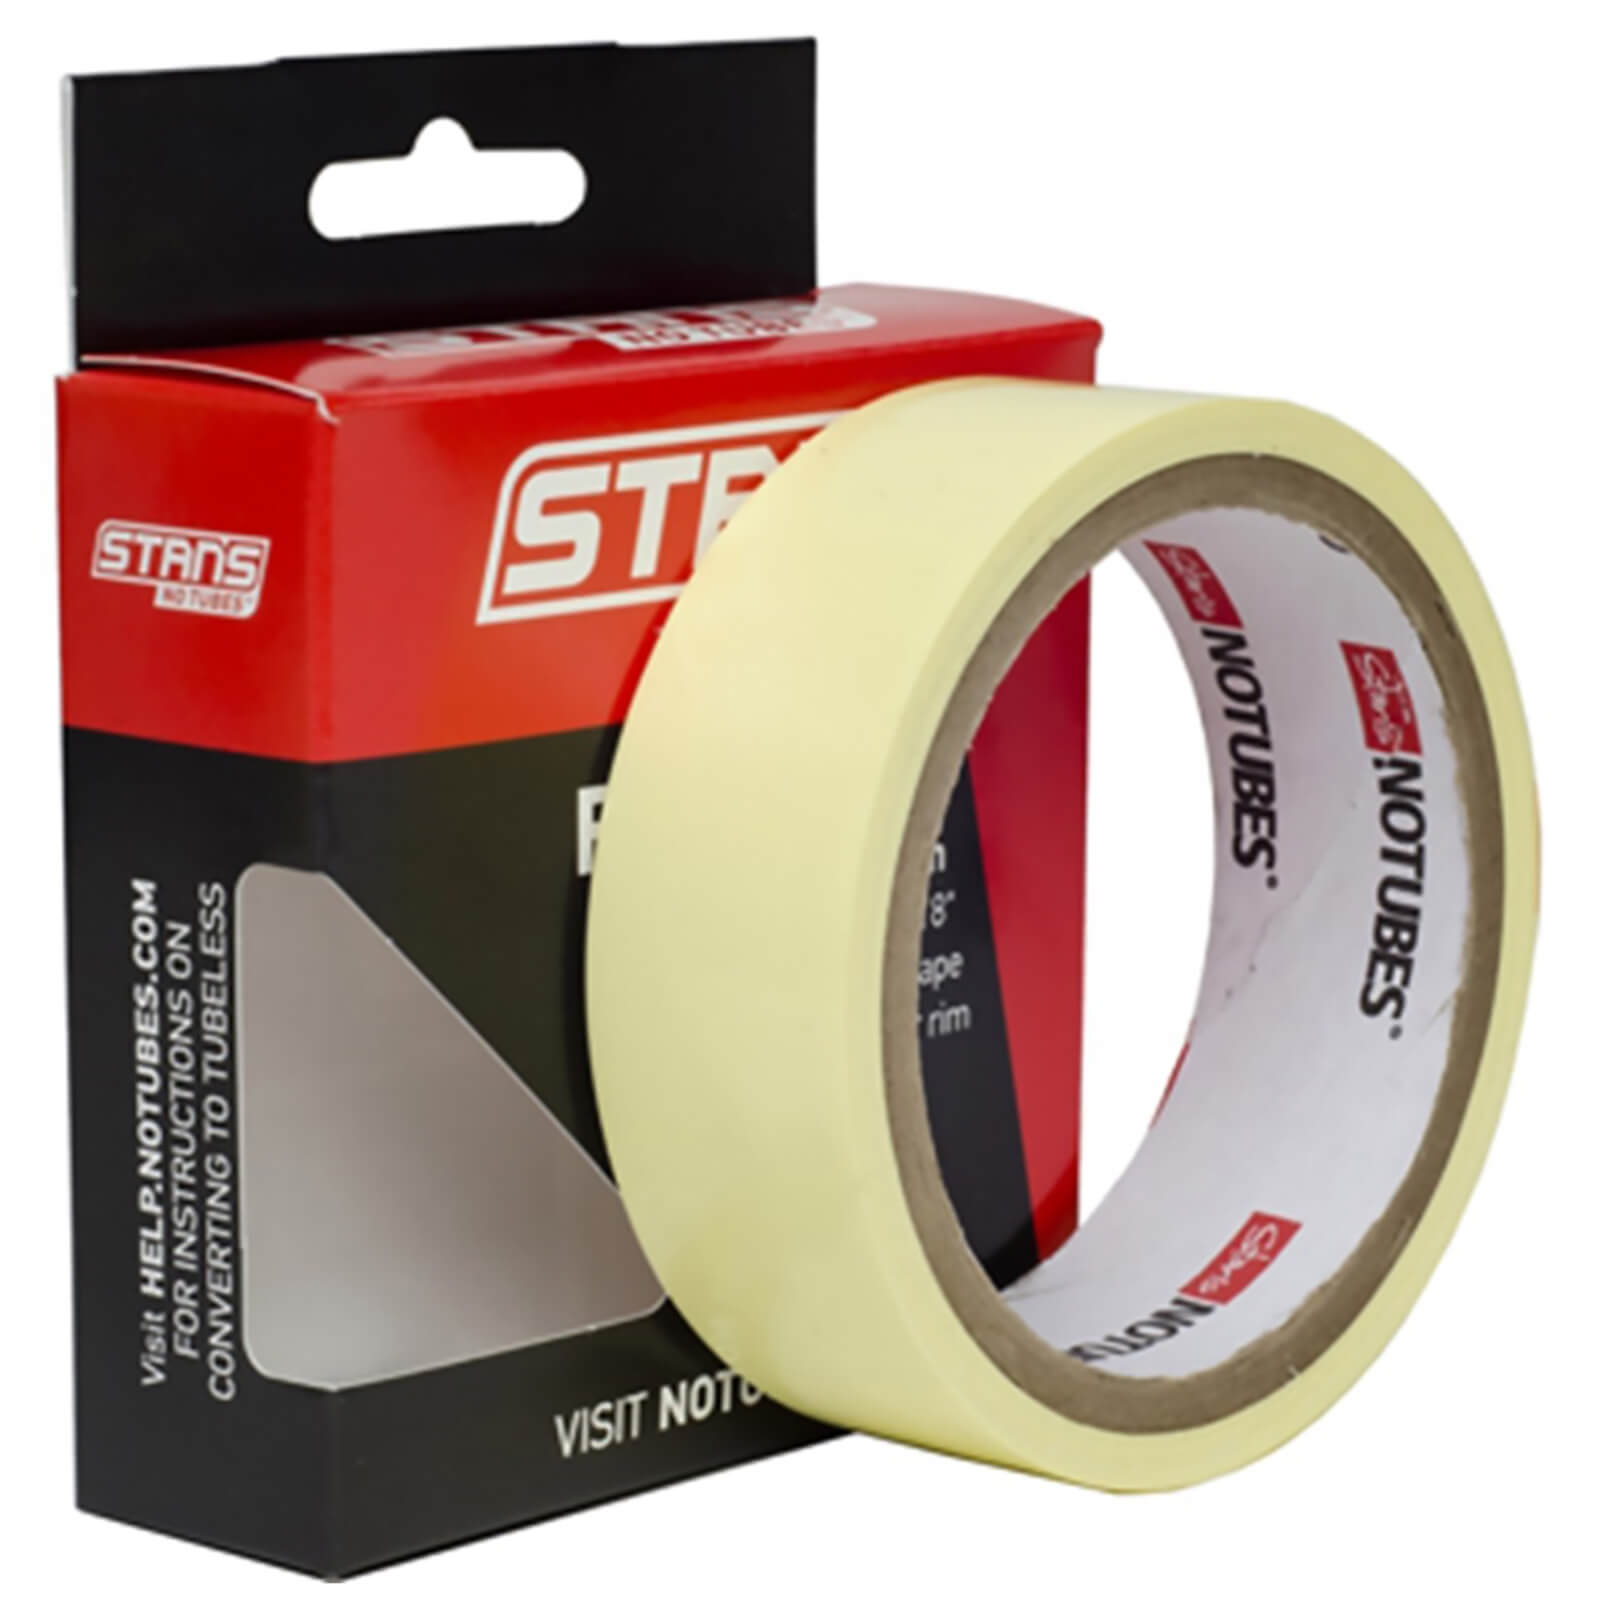 Image of Stans NoTubes 10 Yard Rim Tape - 10yd x 30mm